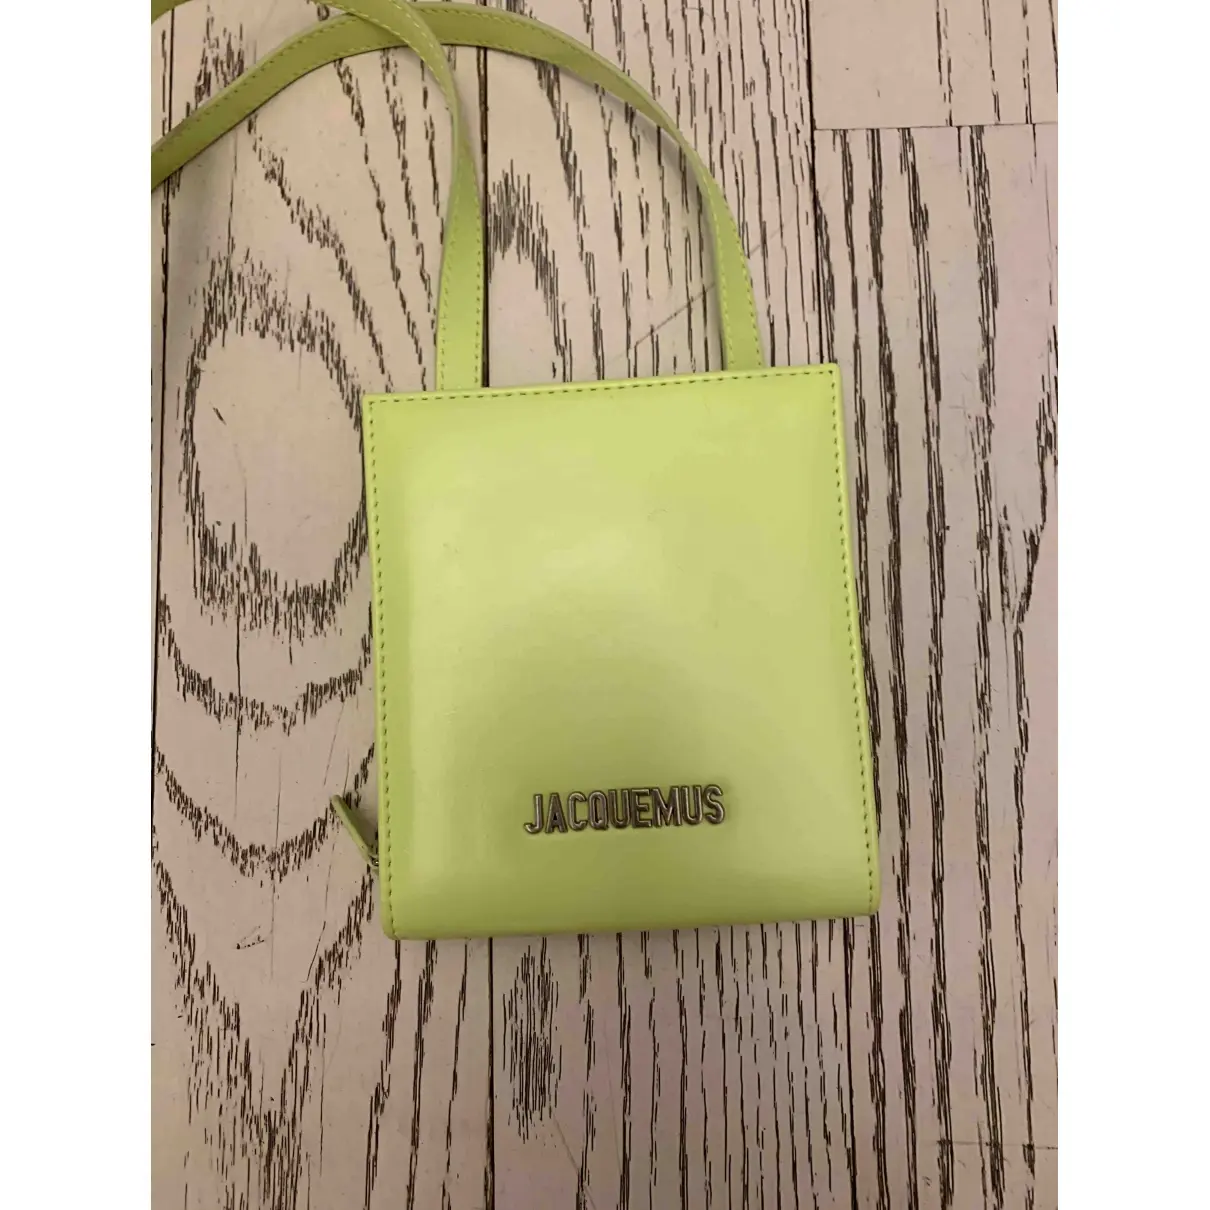 Buy Jacquemus Le Gadjo leather small bag online